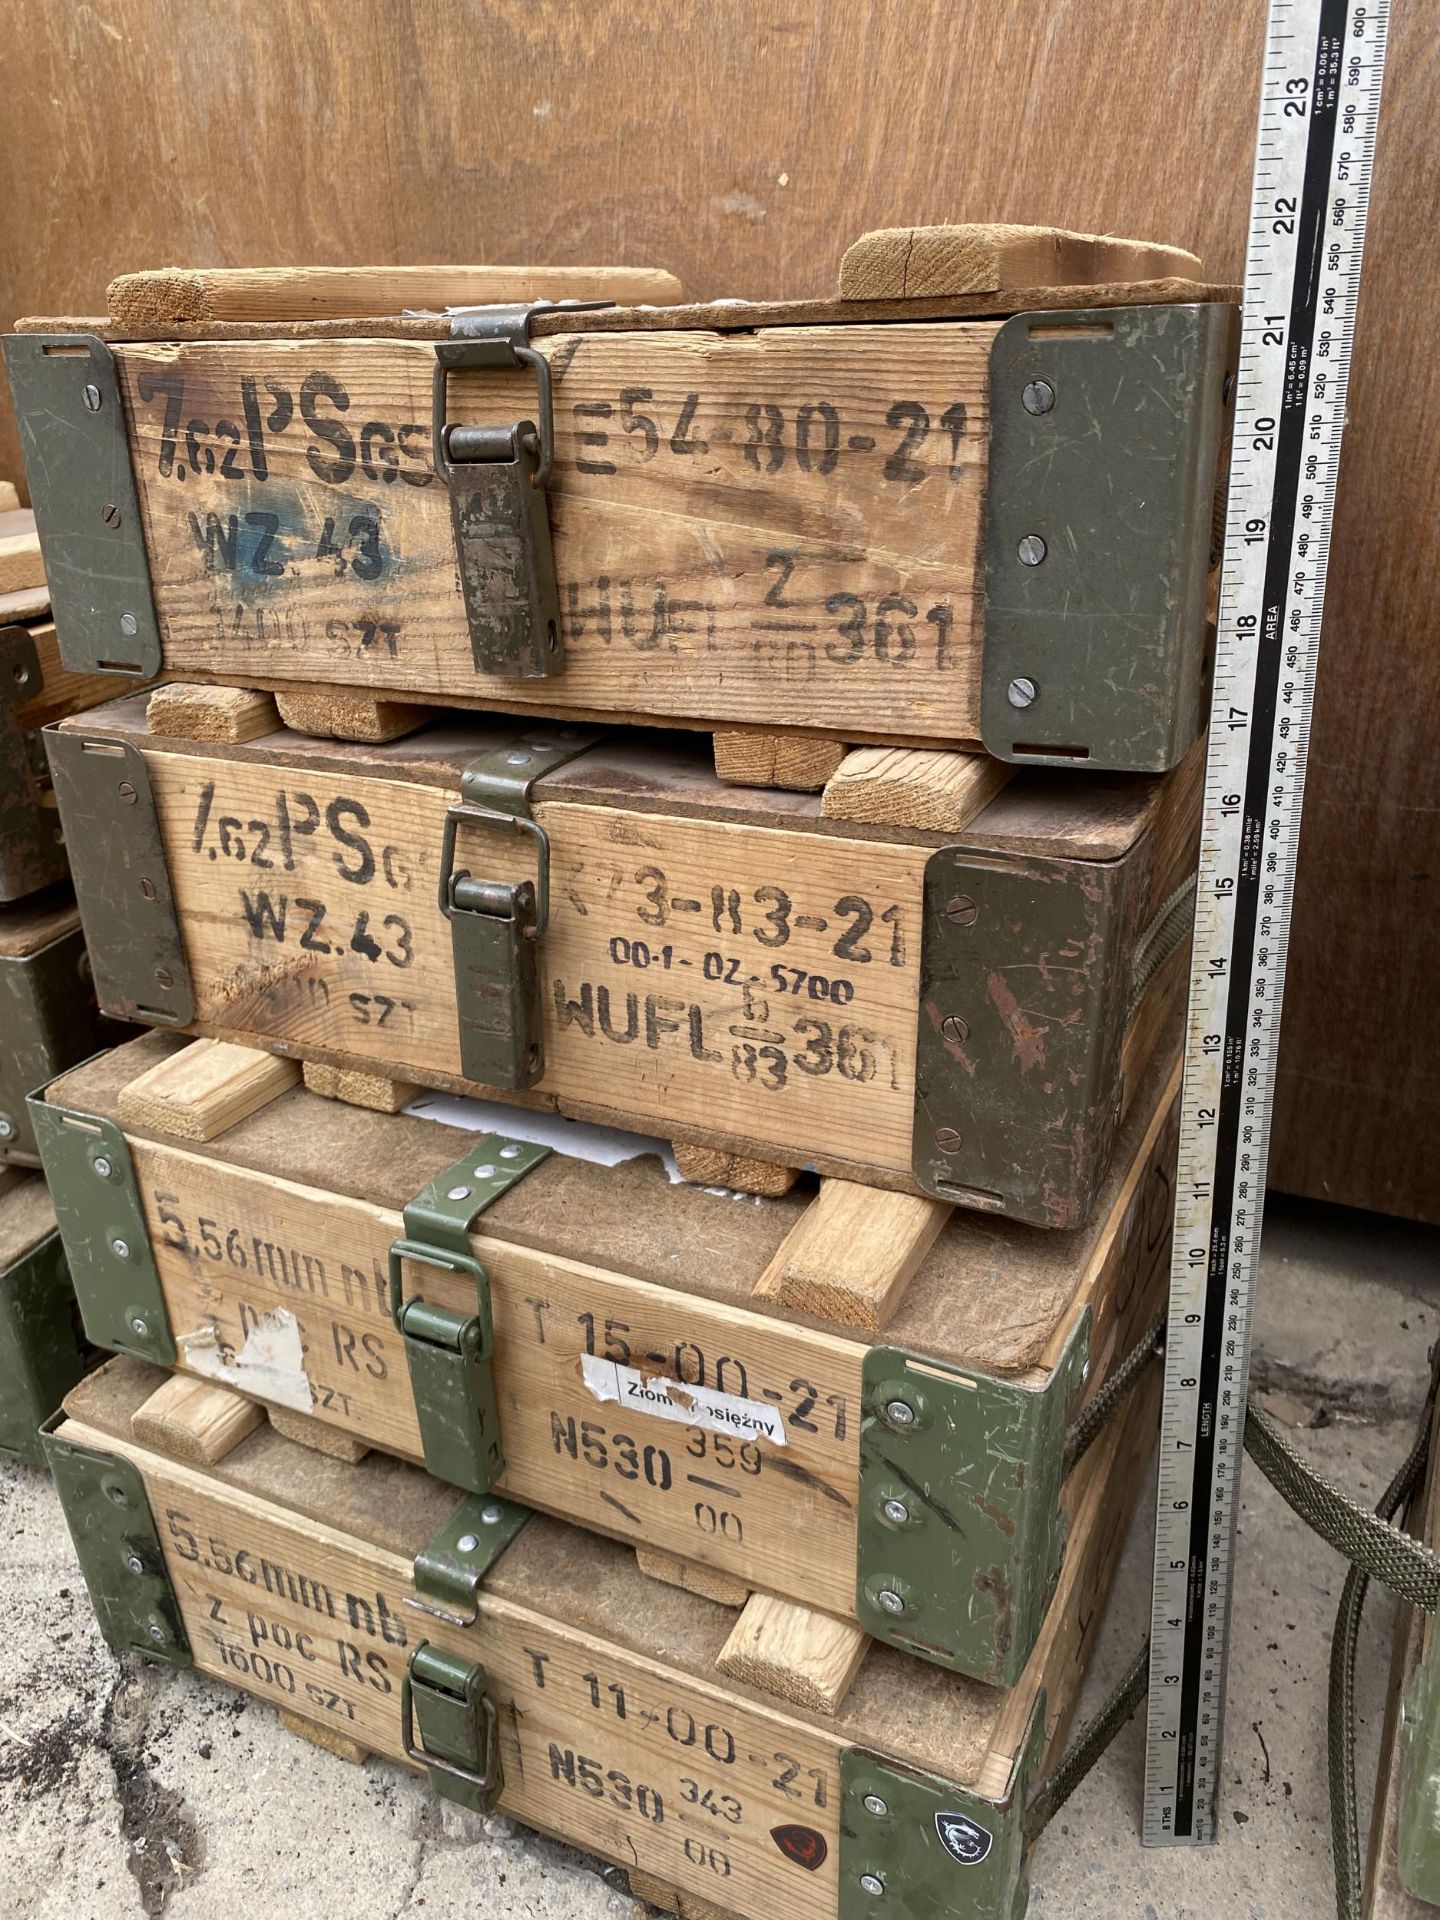 FOUR REPRODUCTION MILITARY BOXES - Image 3 of 4